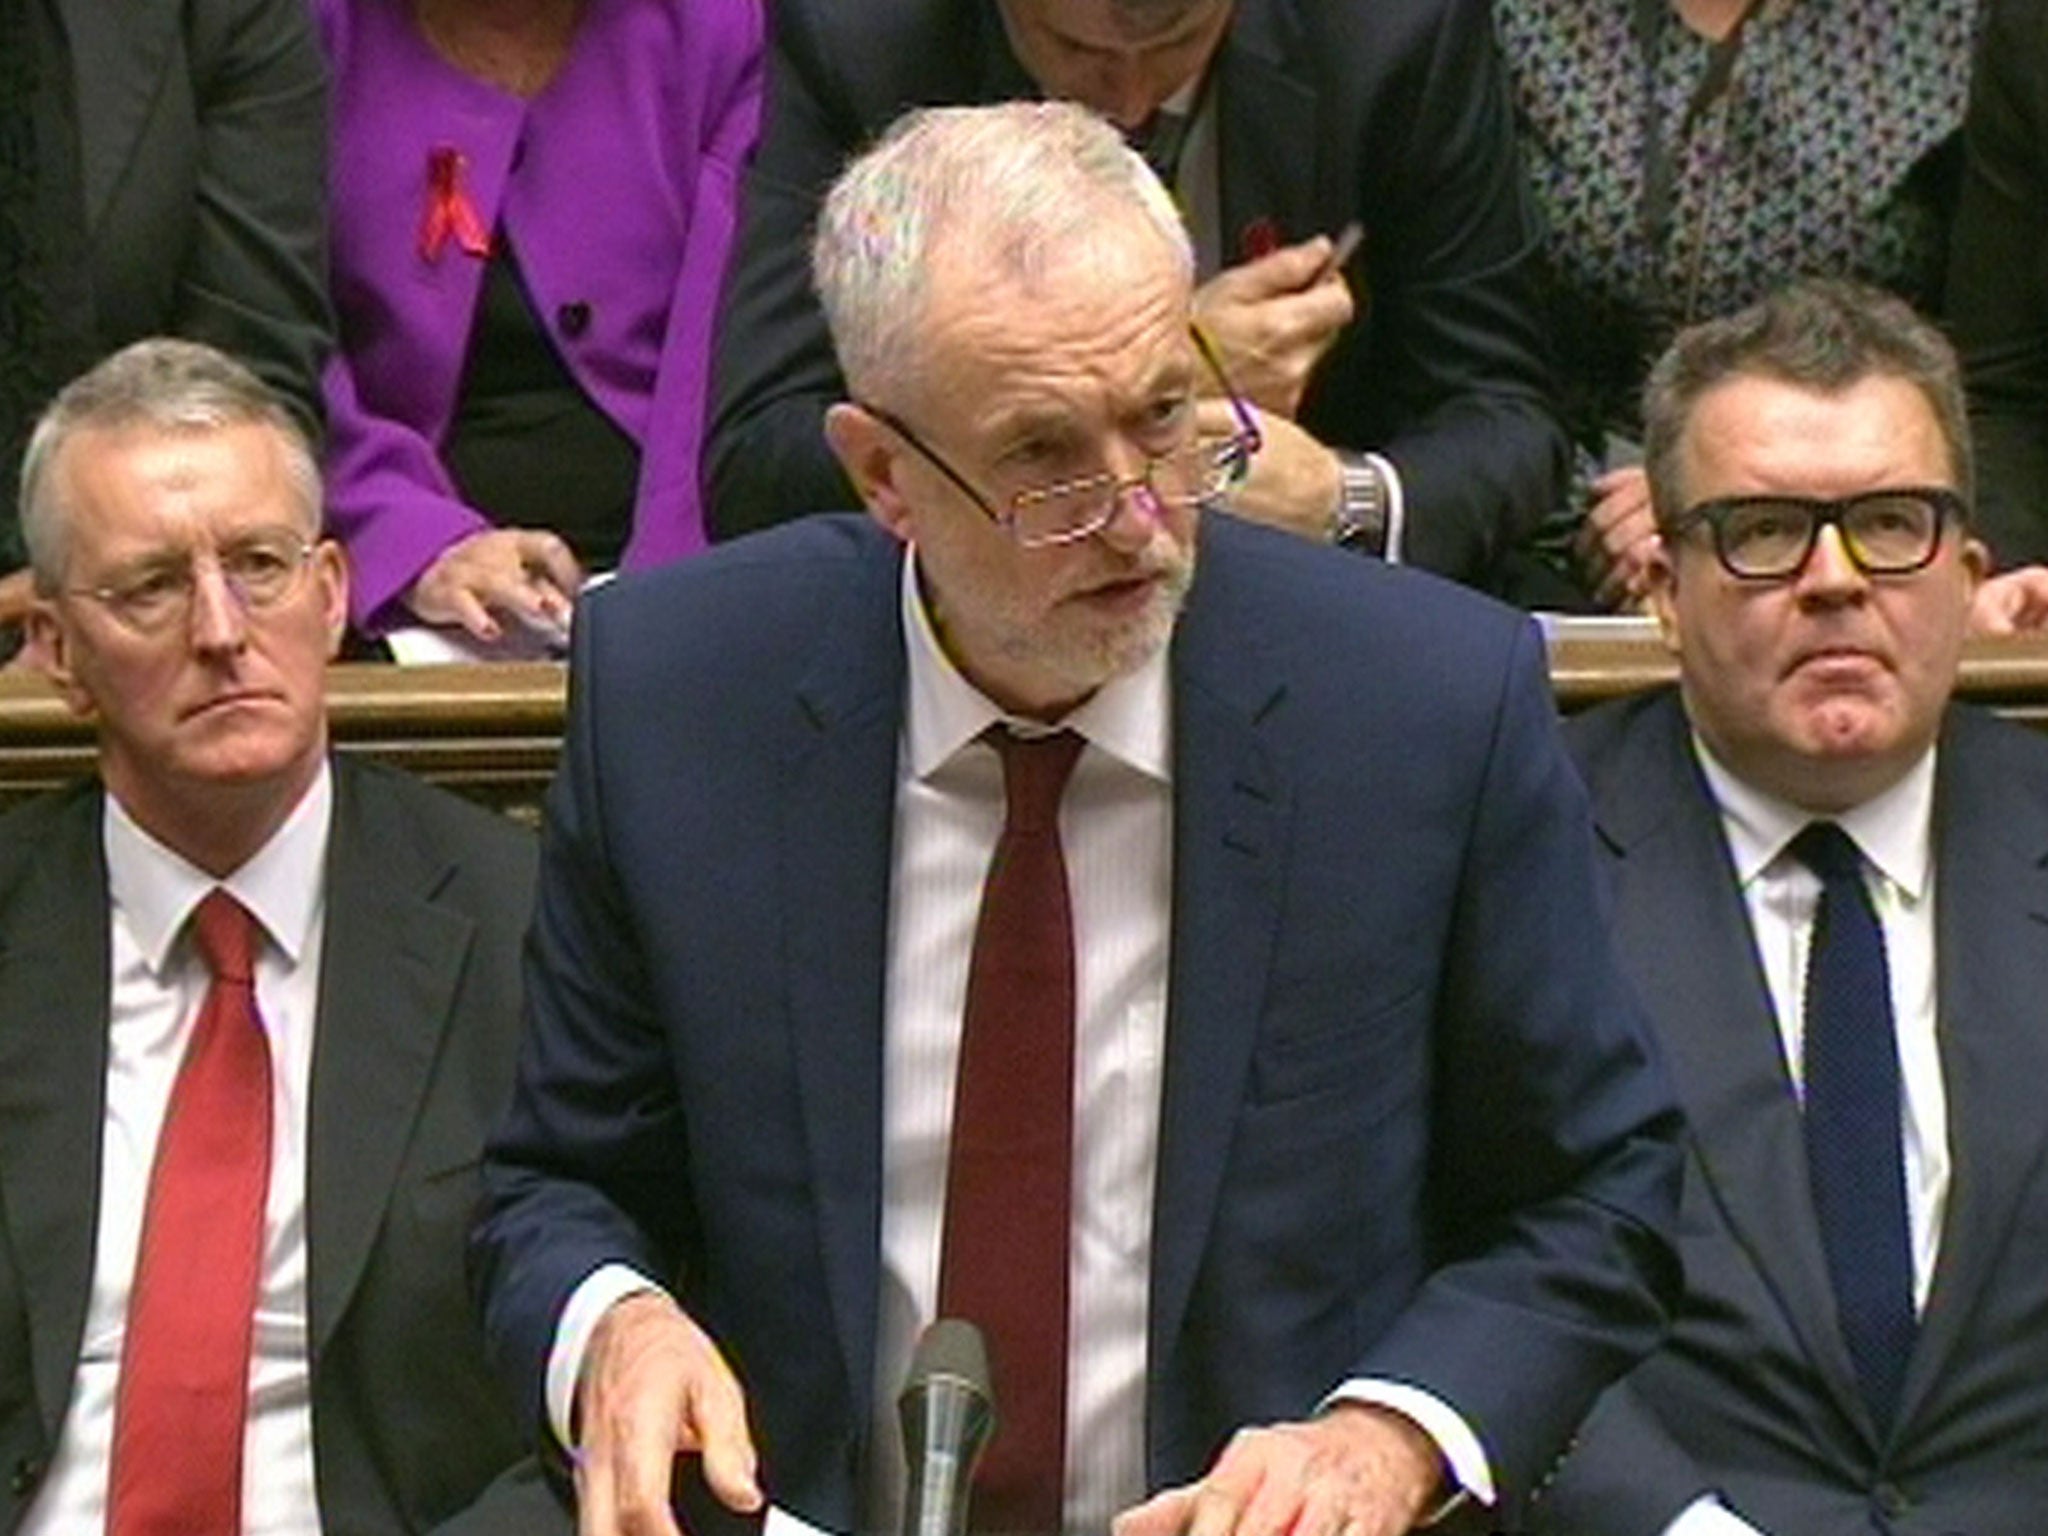 Labour Party leader Jeremy Corbyn speaking during the debate in the House of Commons on extending the bombing campaign against Islamic State to Syria